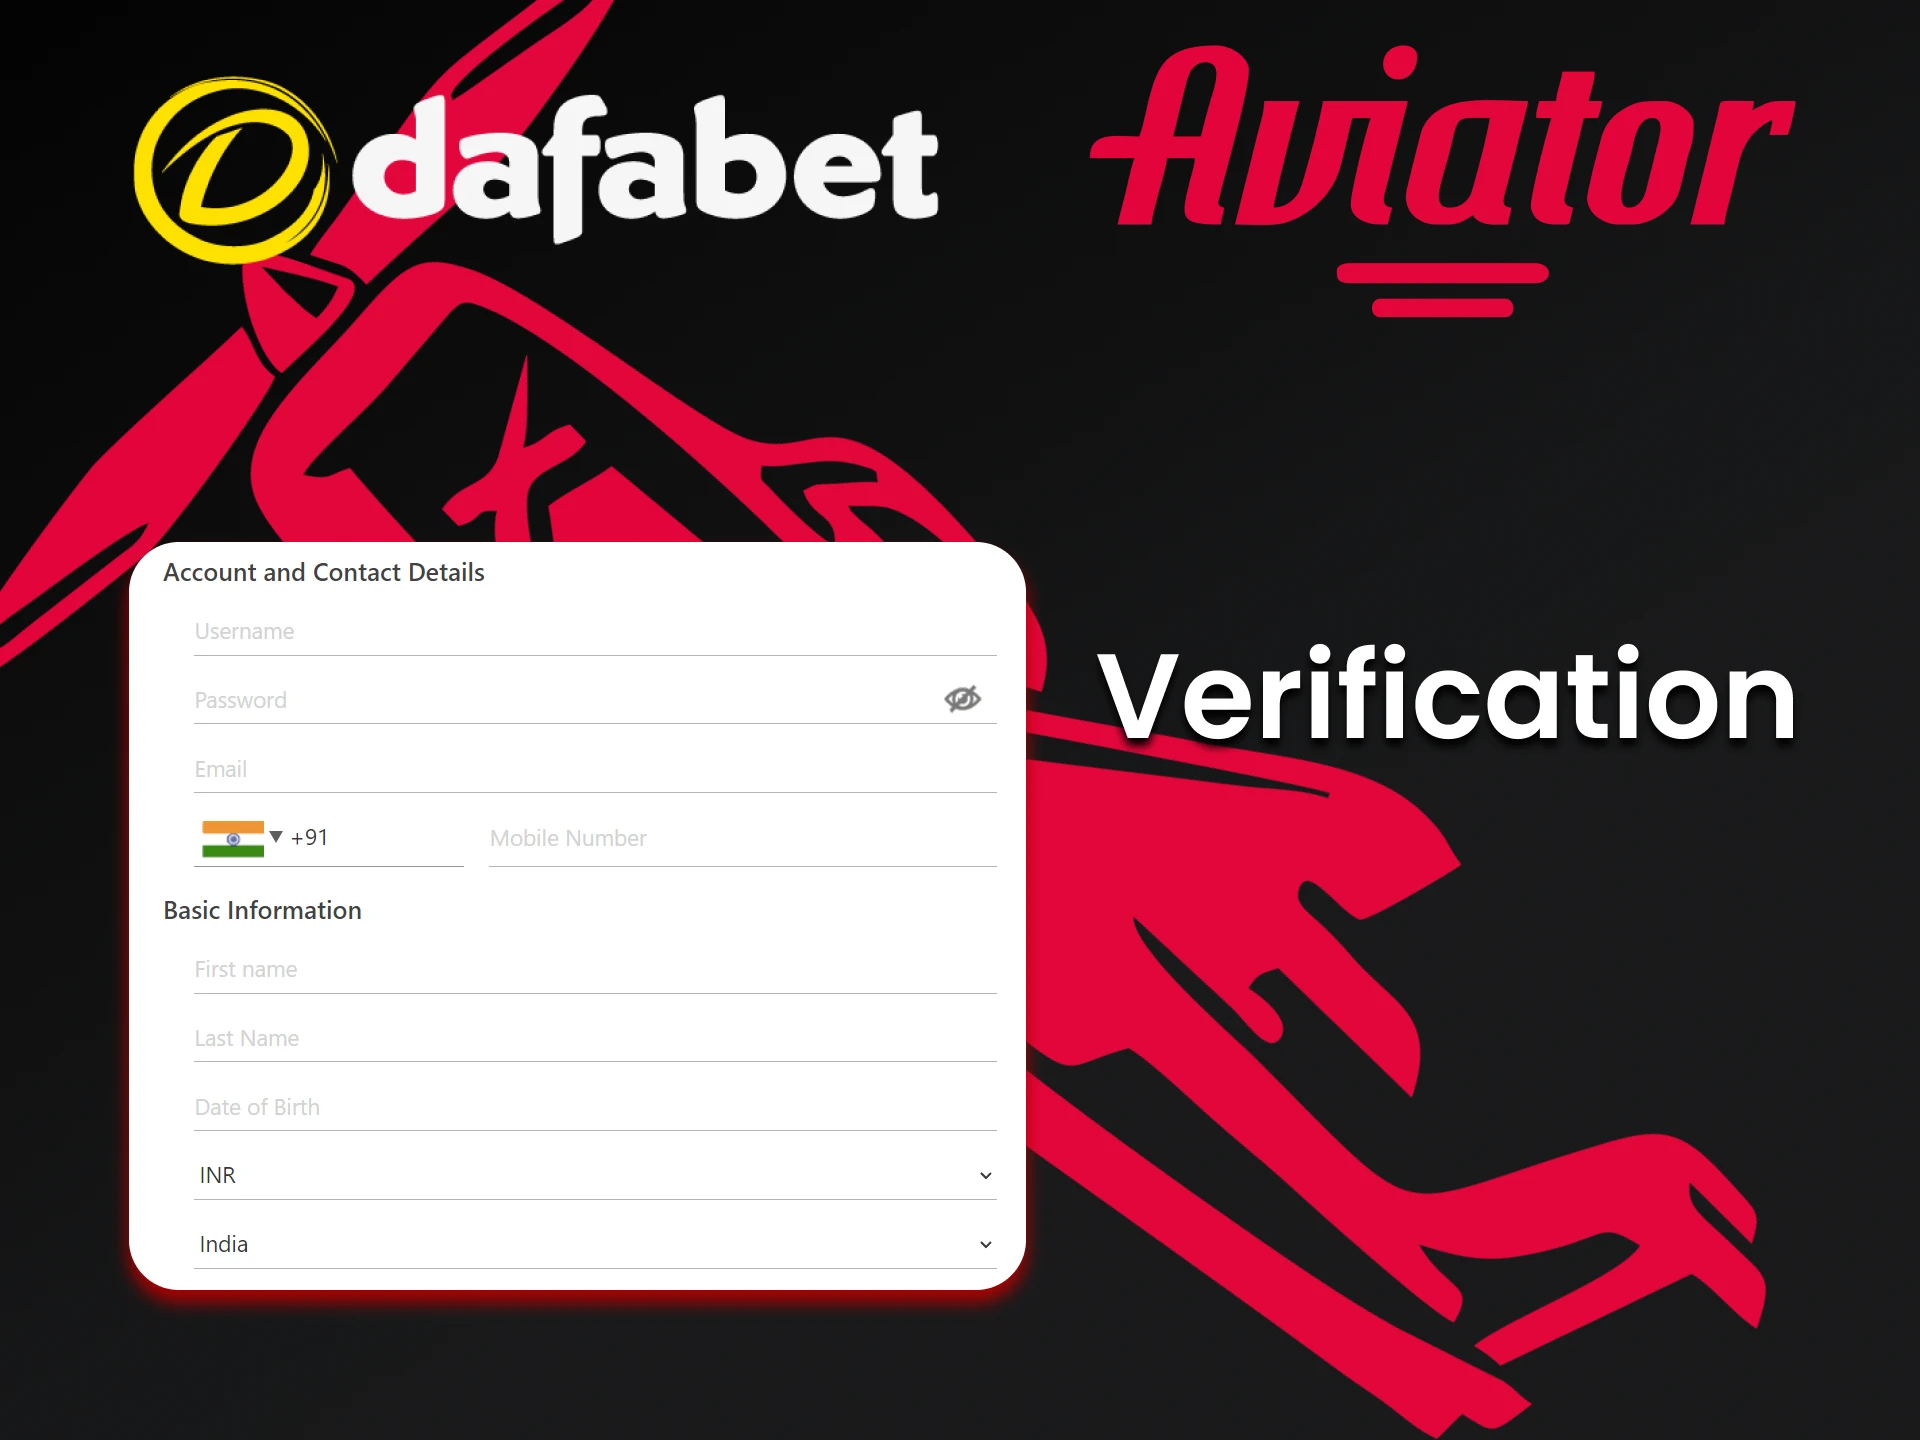 Fill in the required data on Dafabet to play Aviator.